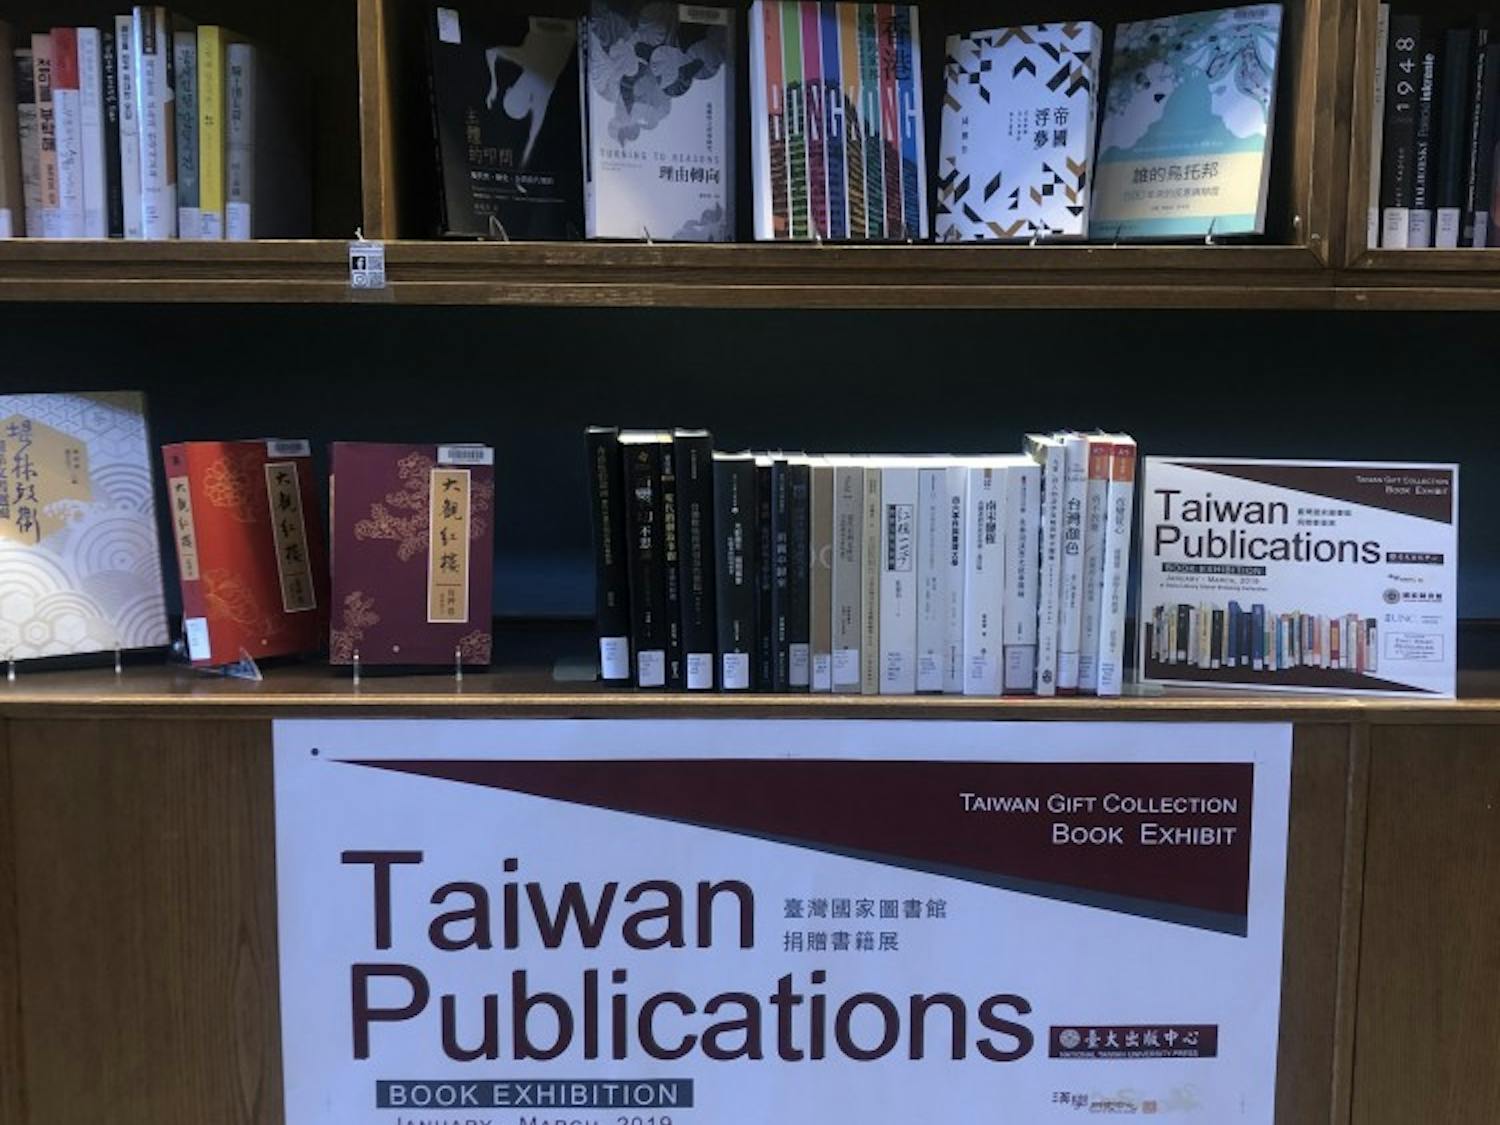 Pictured is the Taiwanese Publications Exhibit display in Davis Library on UNC's campus.&nbsp;